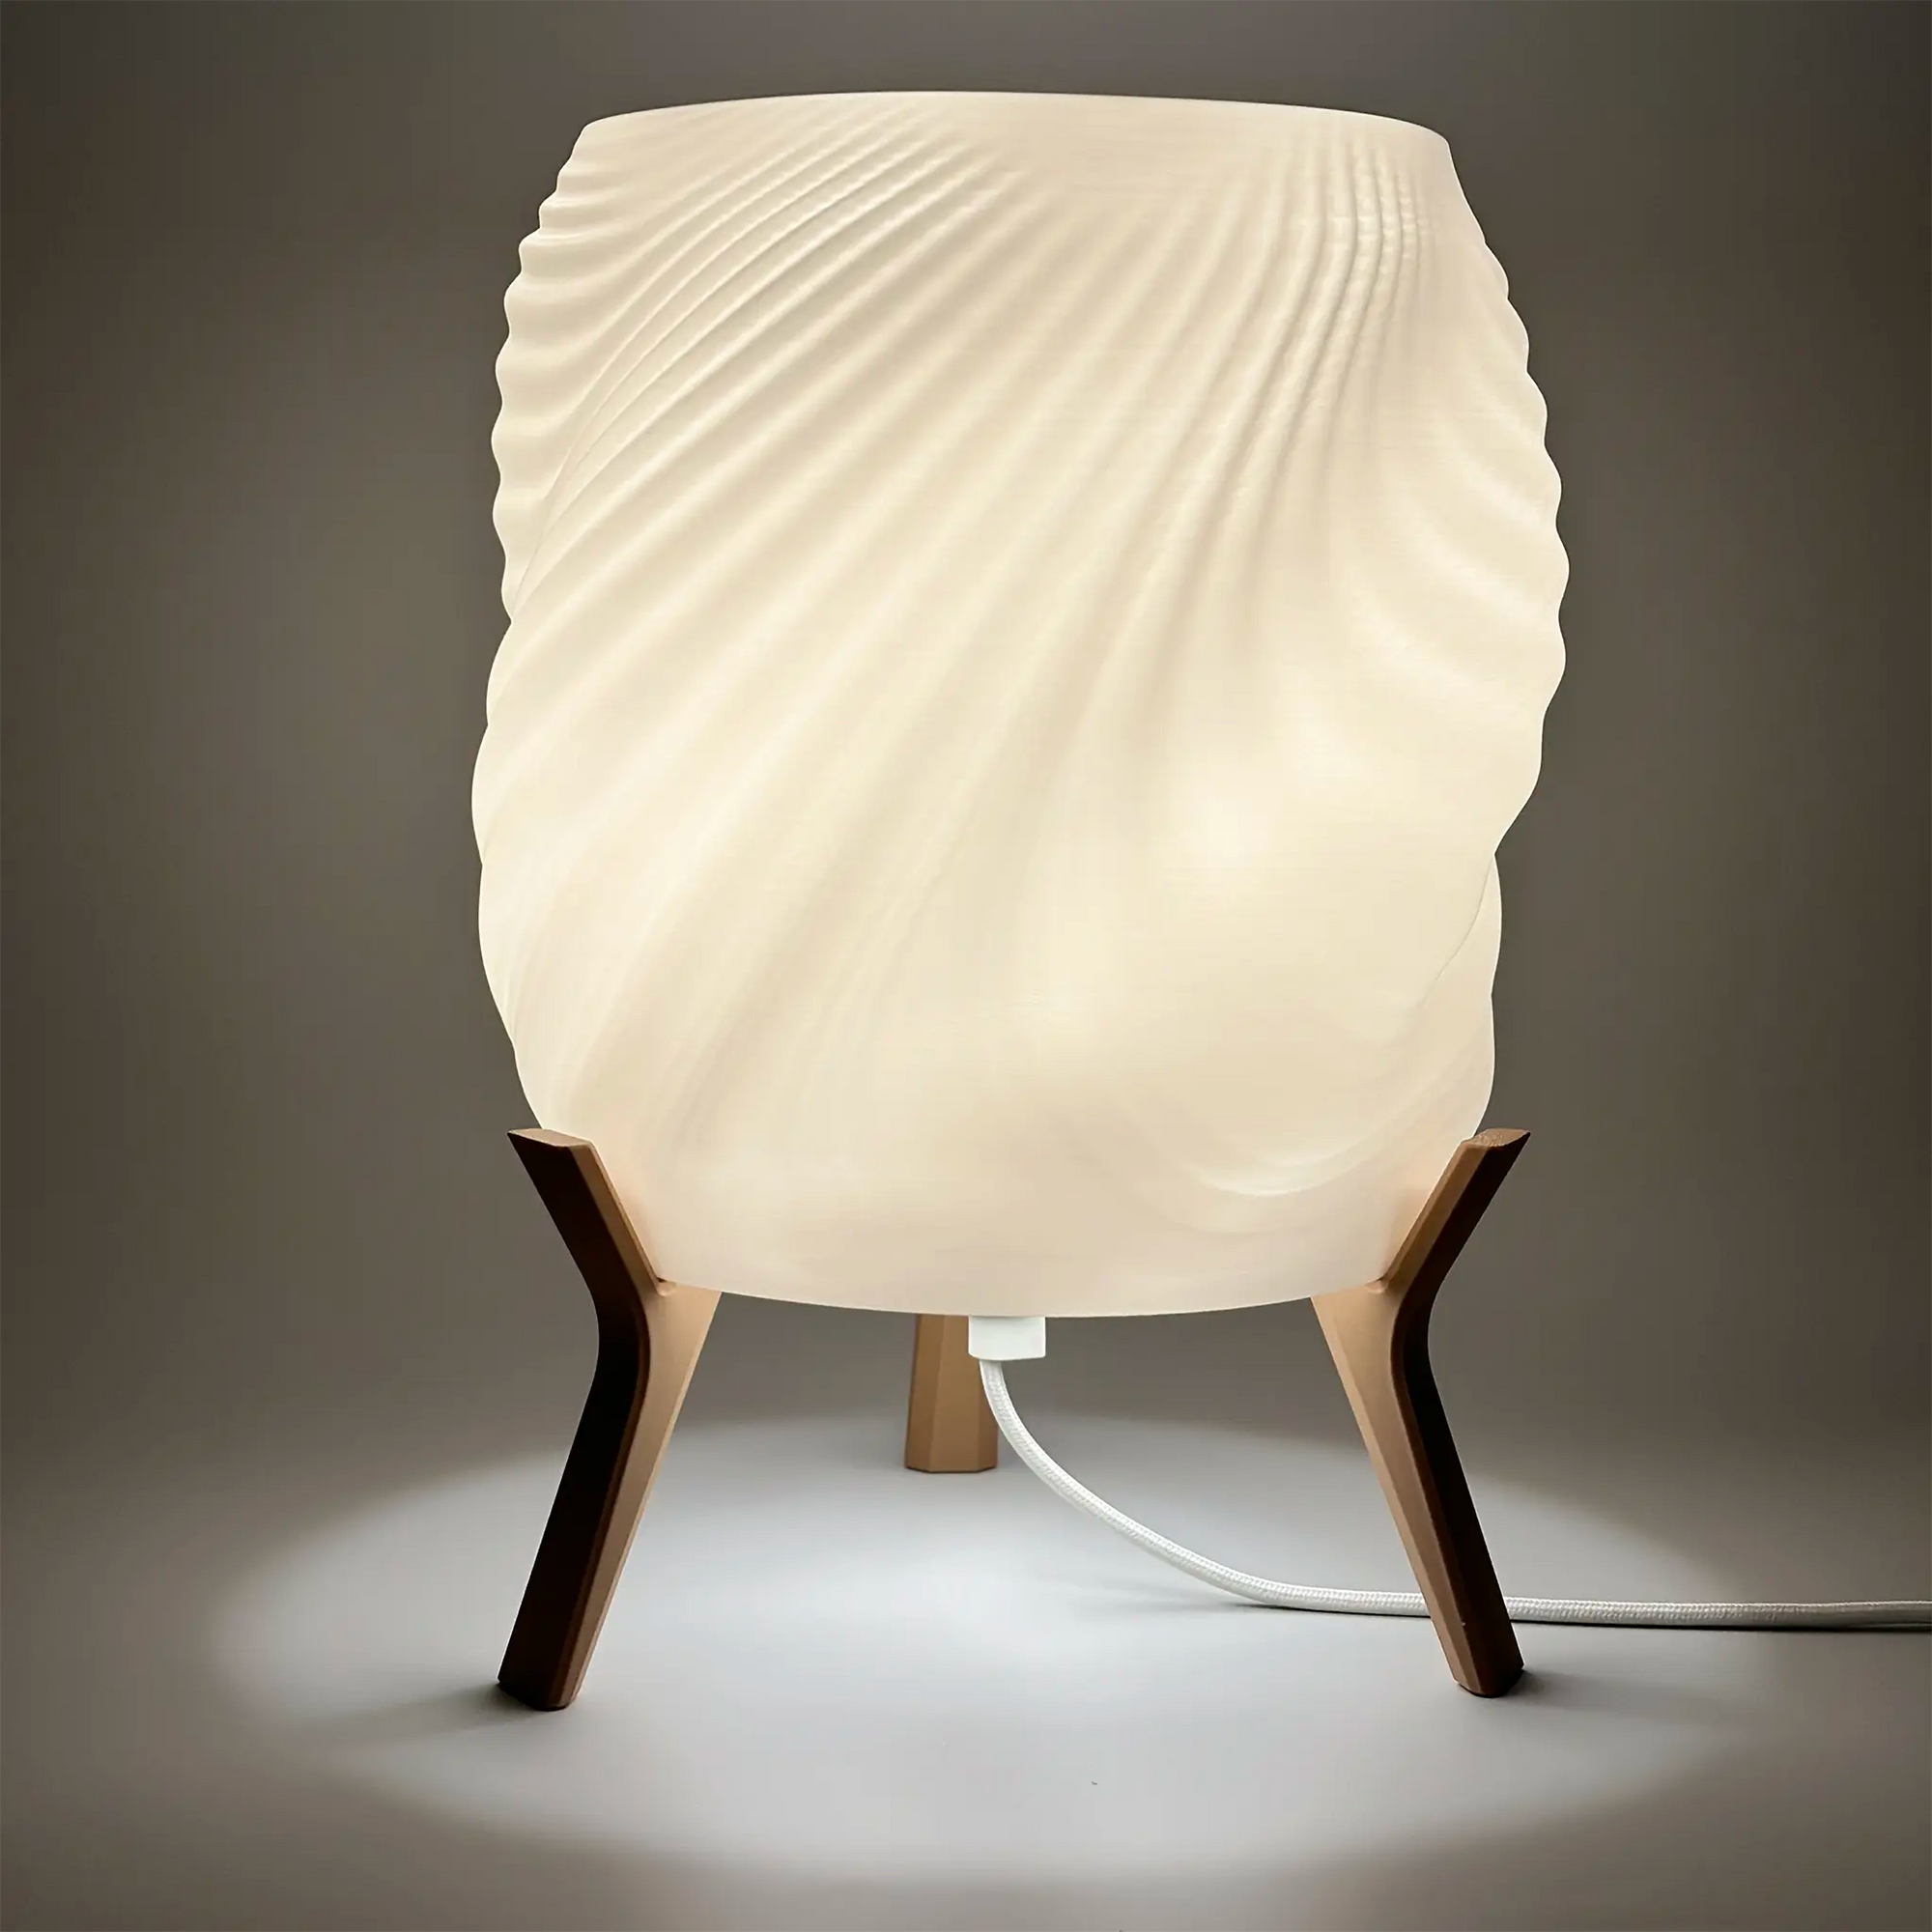 EleganceSweep Minimalist Table Lamp - Bedside Lamp in cotton white shade and wood brown base. Lamp is turned on with 3000k LED bulb.